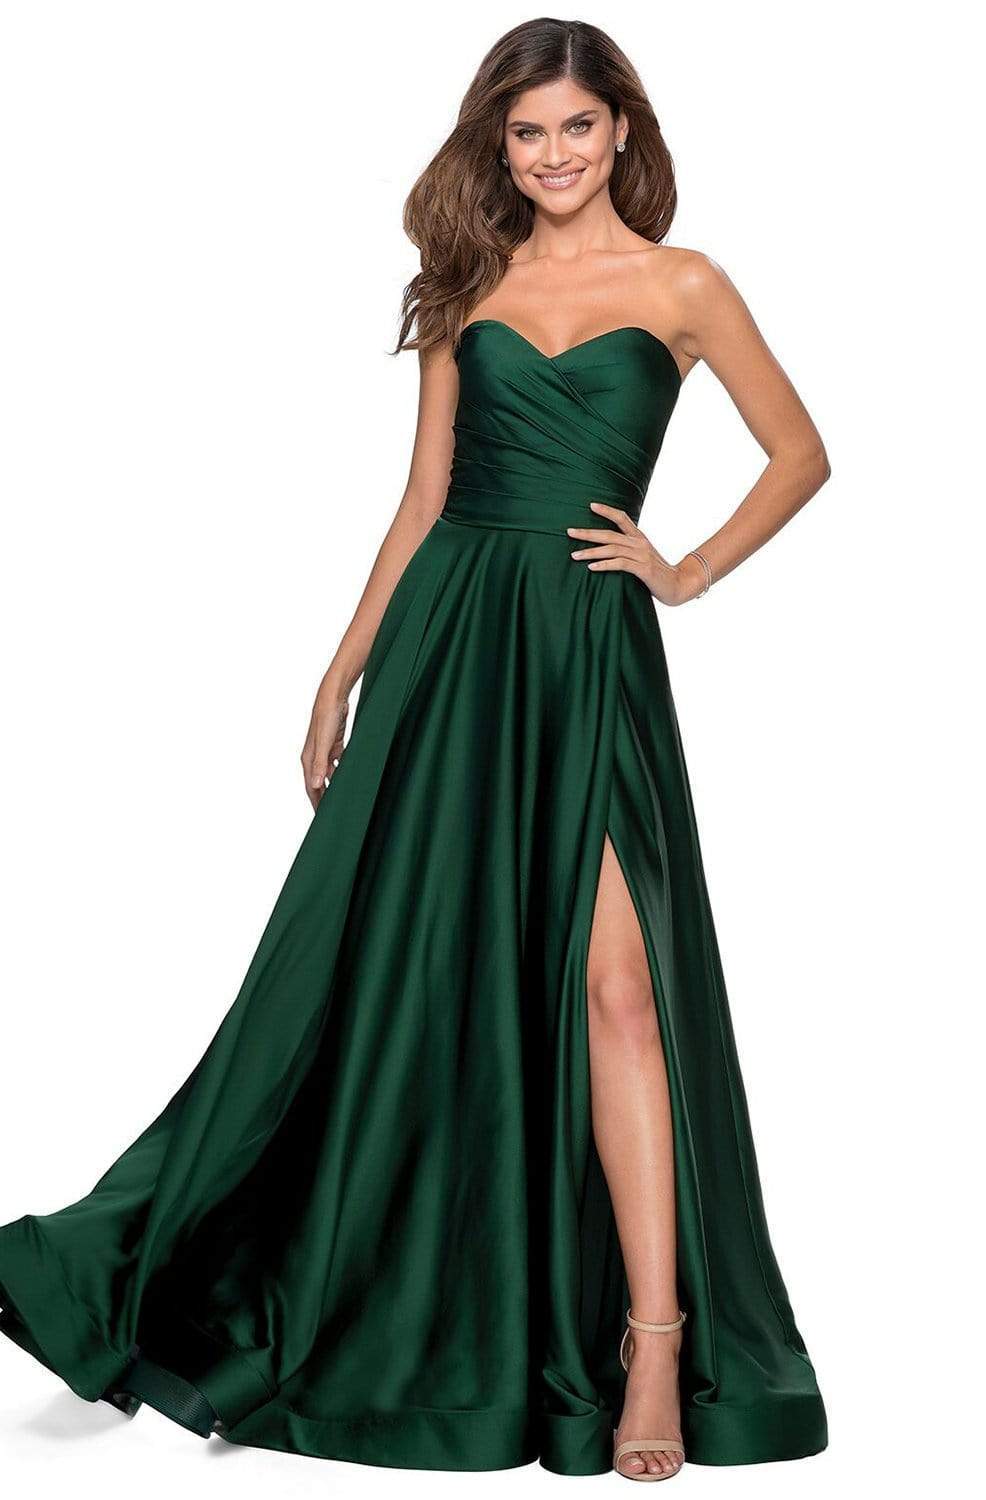 Image of La Femme - 28608 Strapless Sweetheart Wrap Bodice Simple Prom A-line Gown